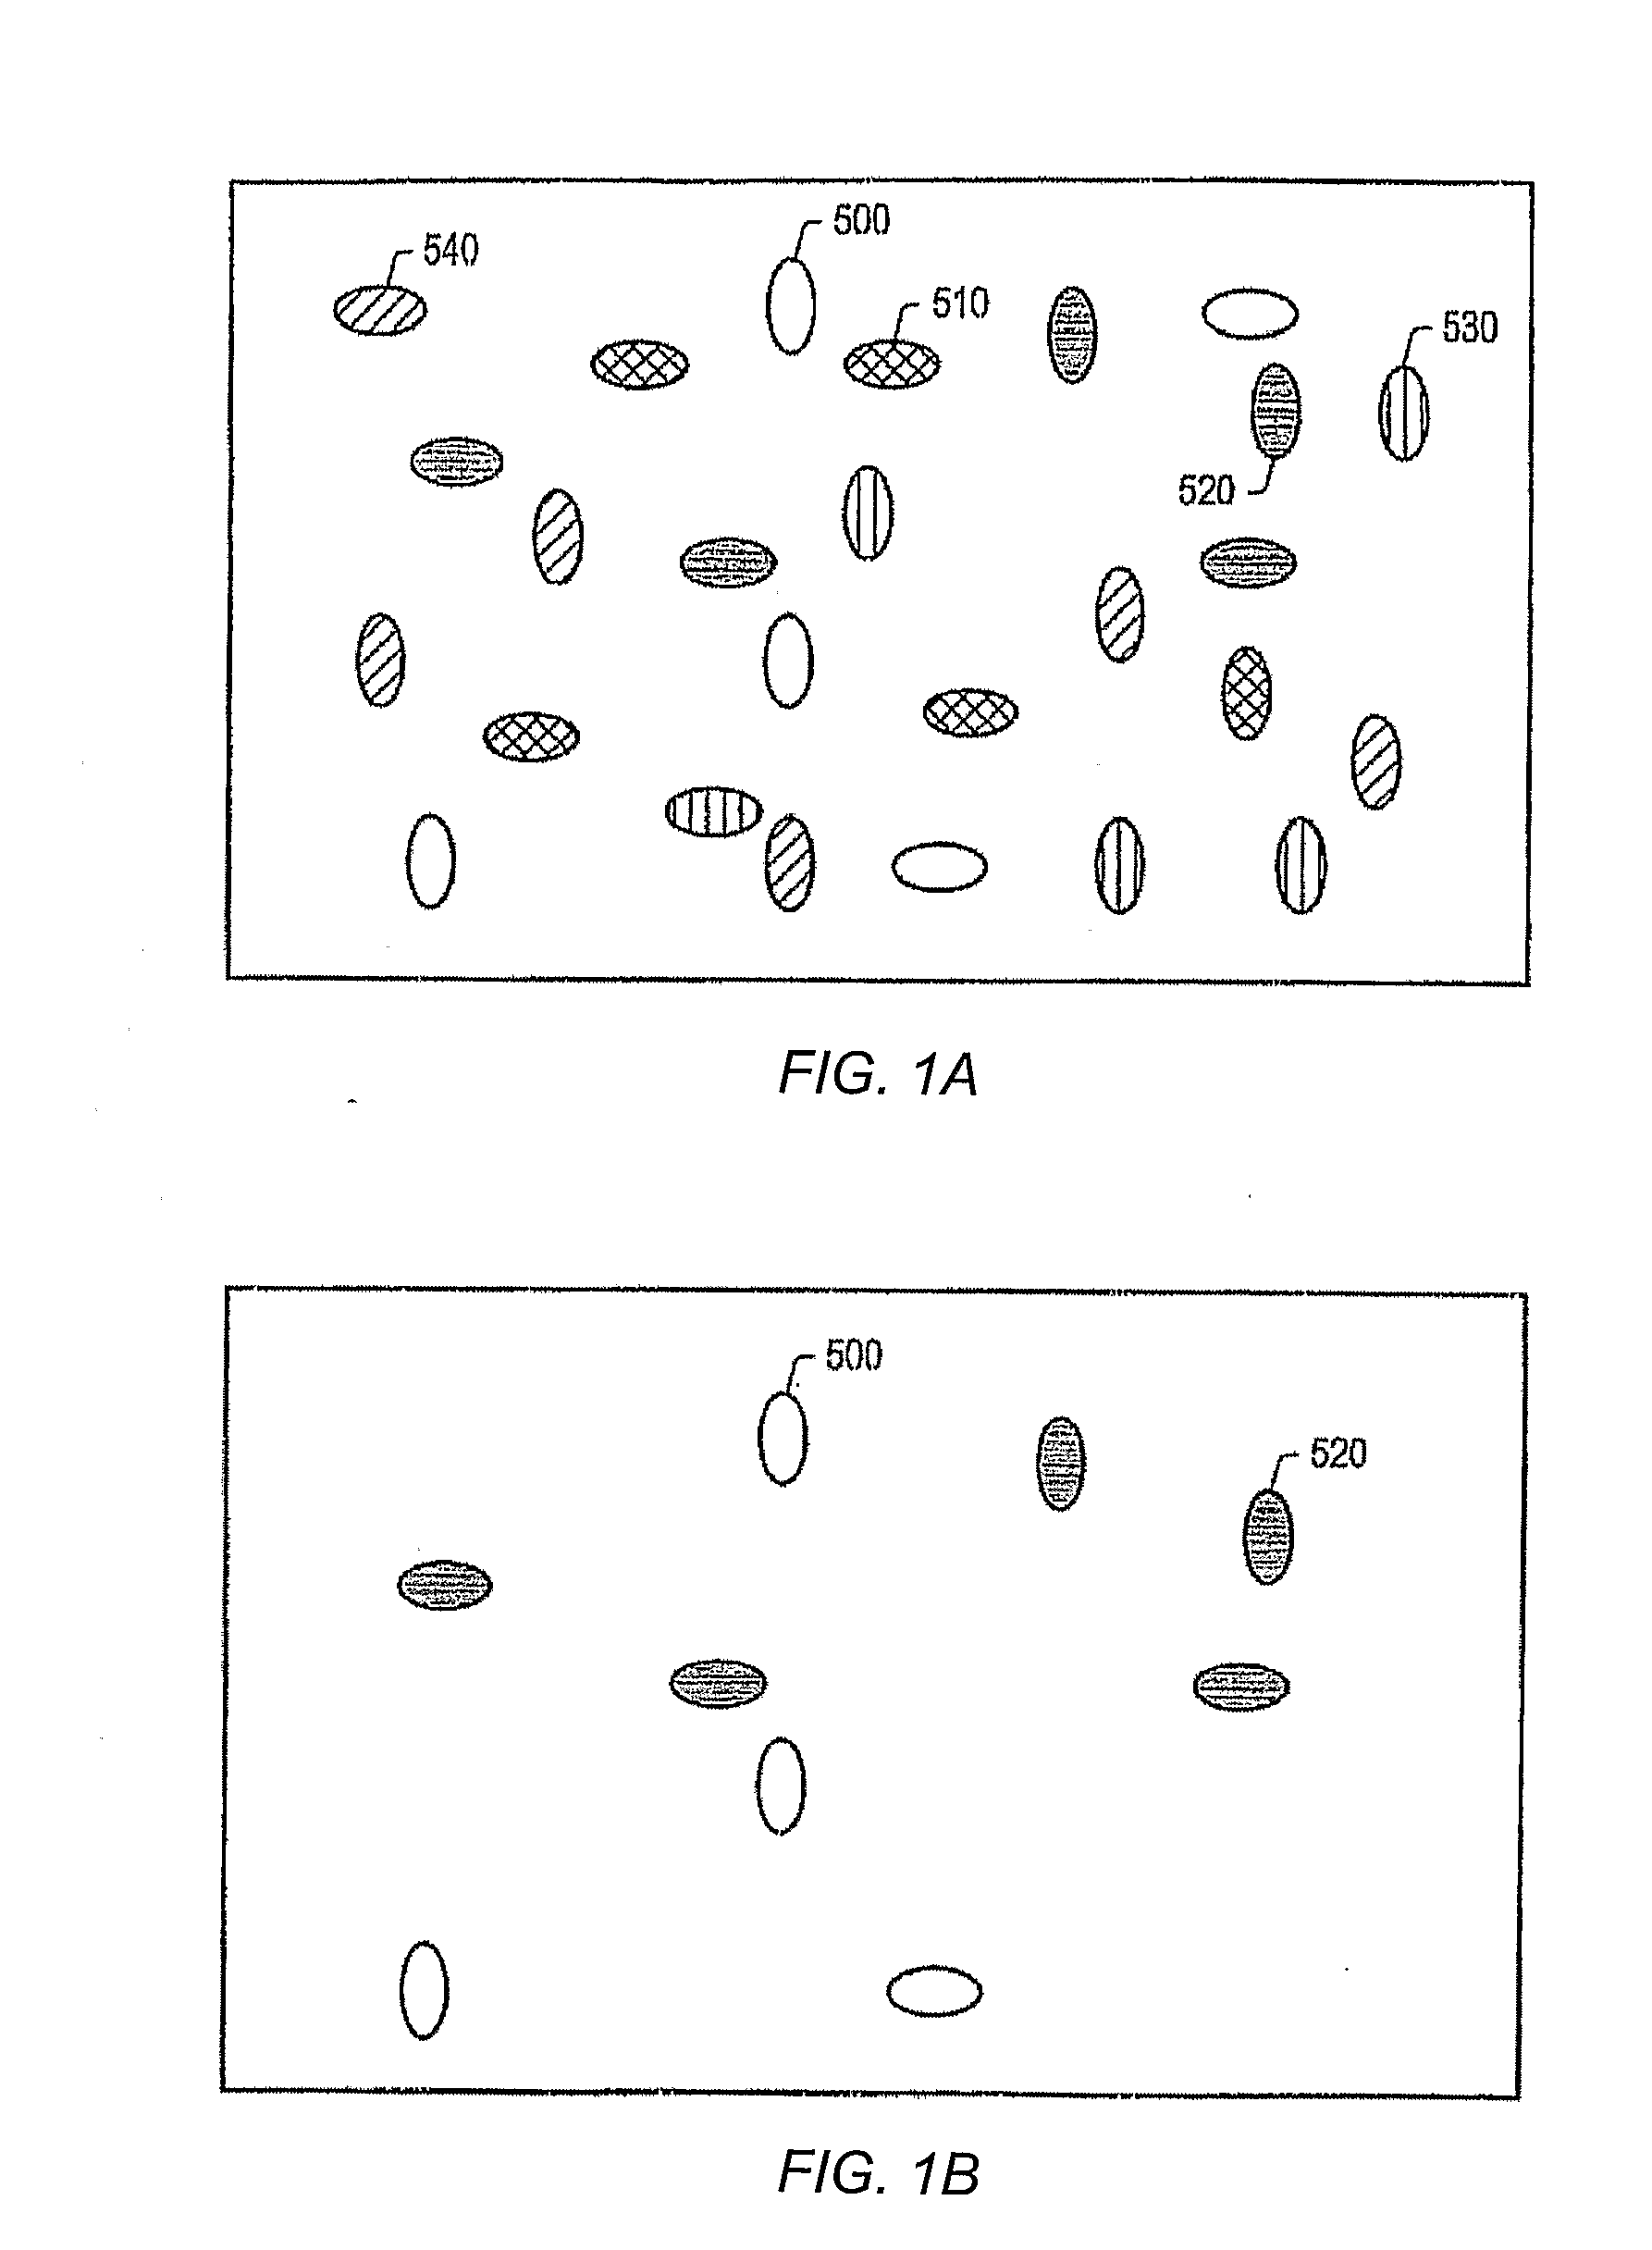 Methods and compositions related to determination and use of white blood cell counts